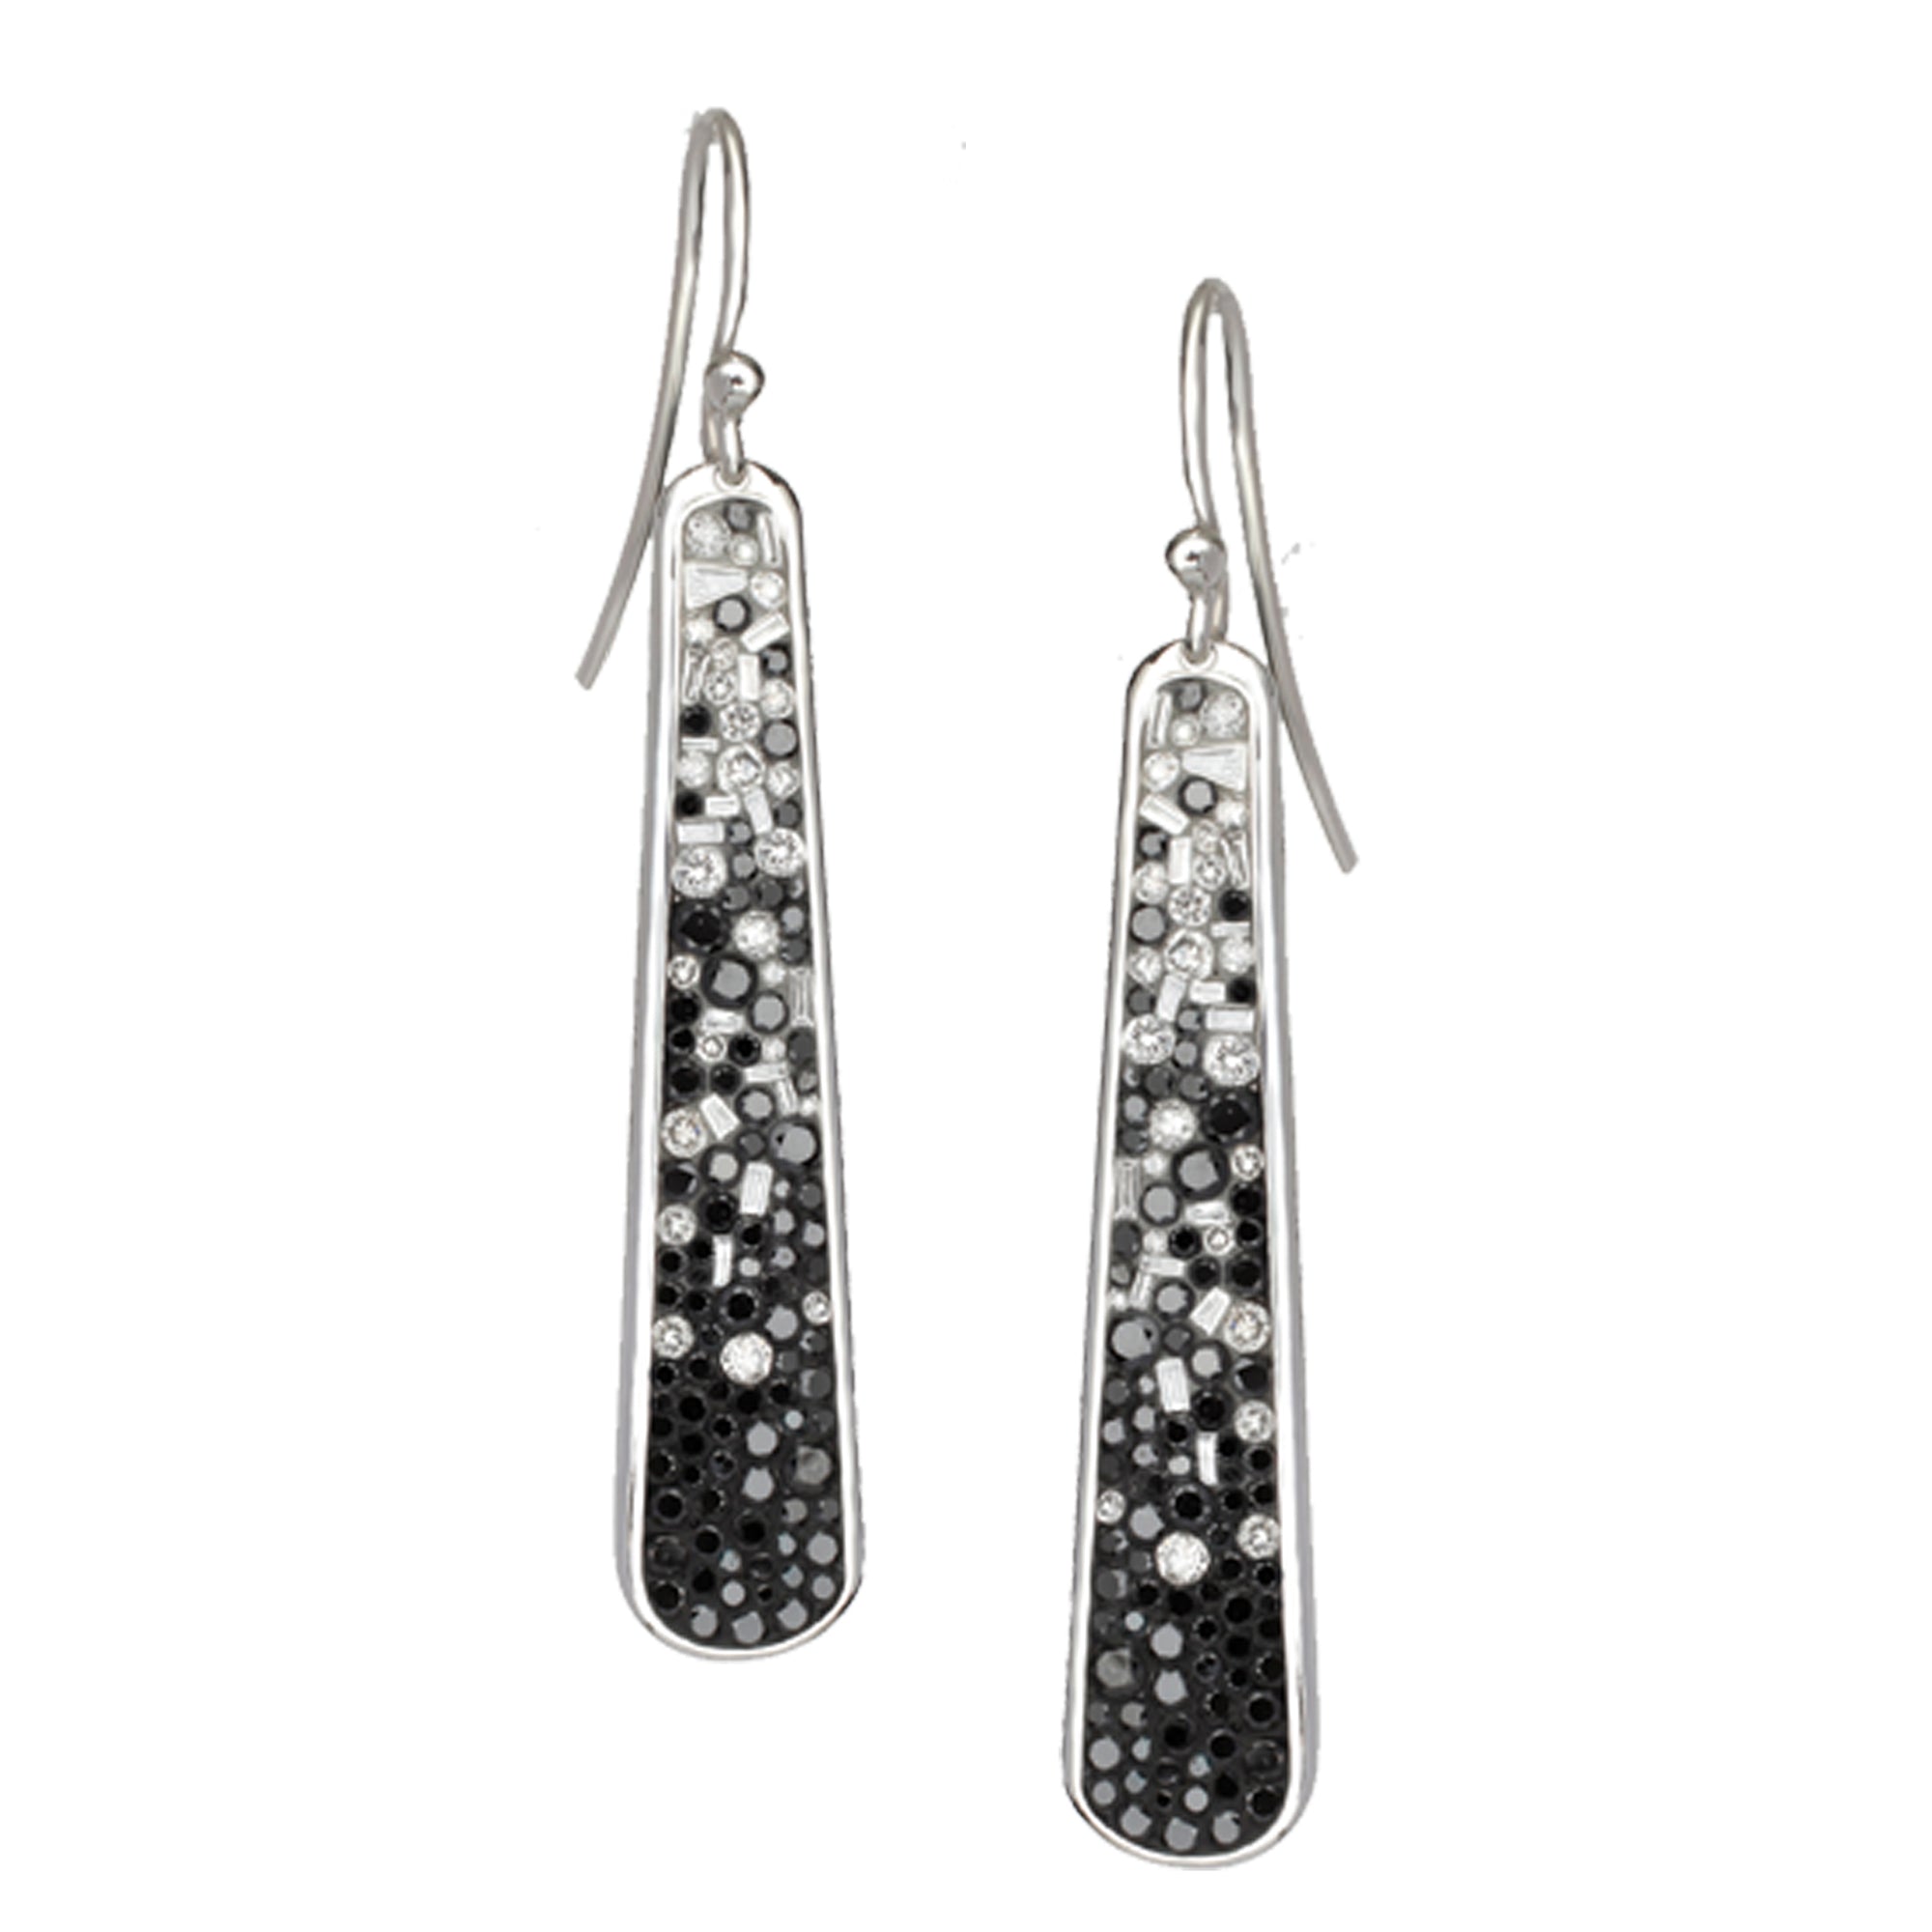 Black Ombre Stilletto Diamond Earrings by Pleve available at Talisman Collection Fine Jewelers in El Dorado Hills, CA and online. Specs: 18k wg dia & color enhanced dia 2.50 cttw